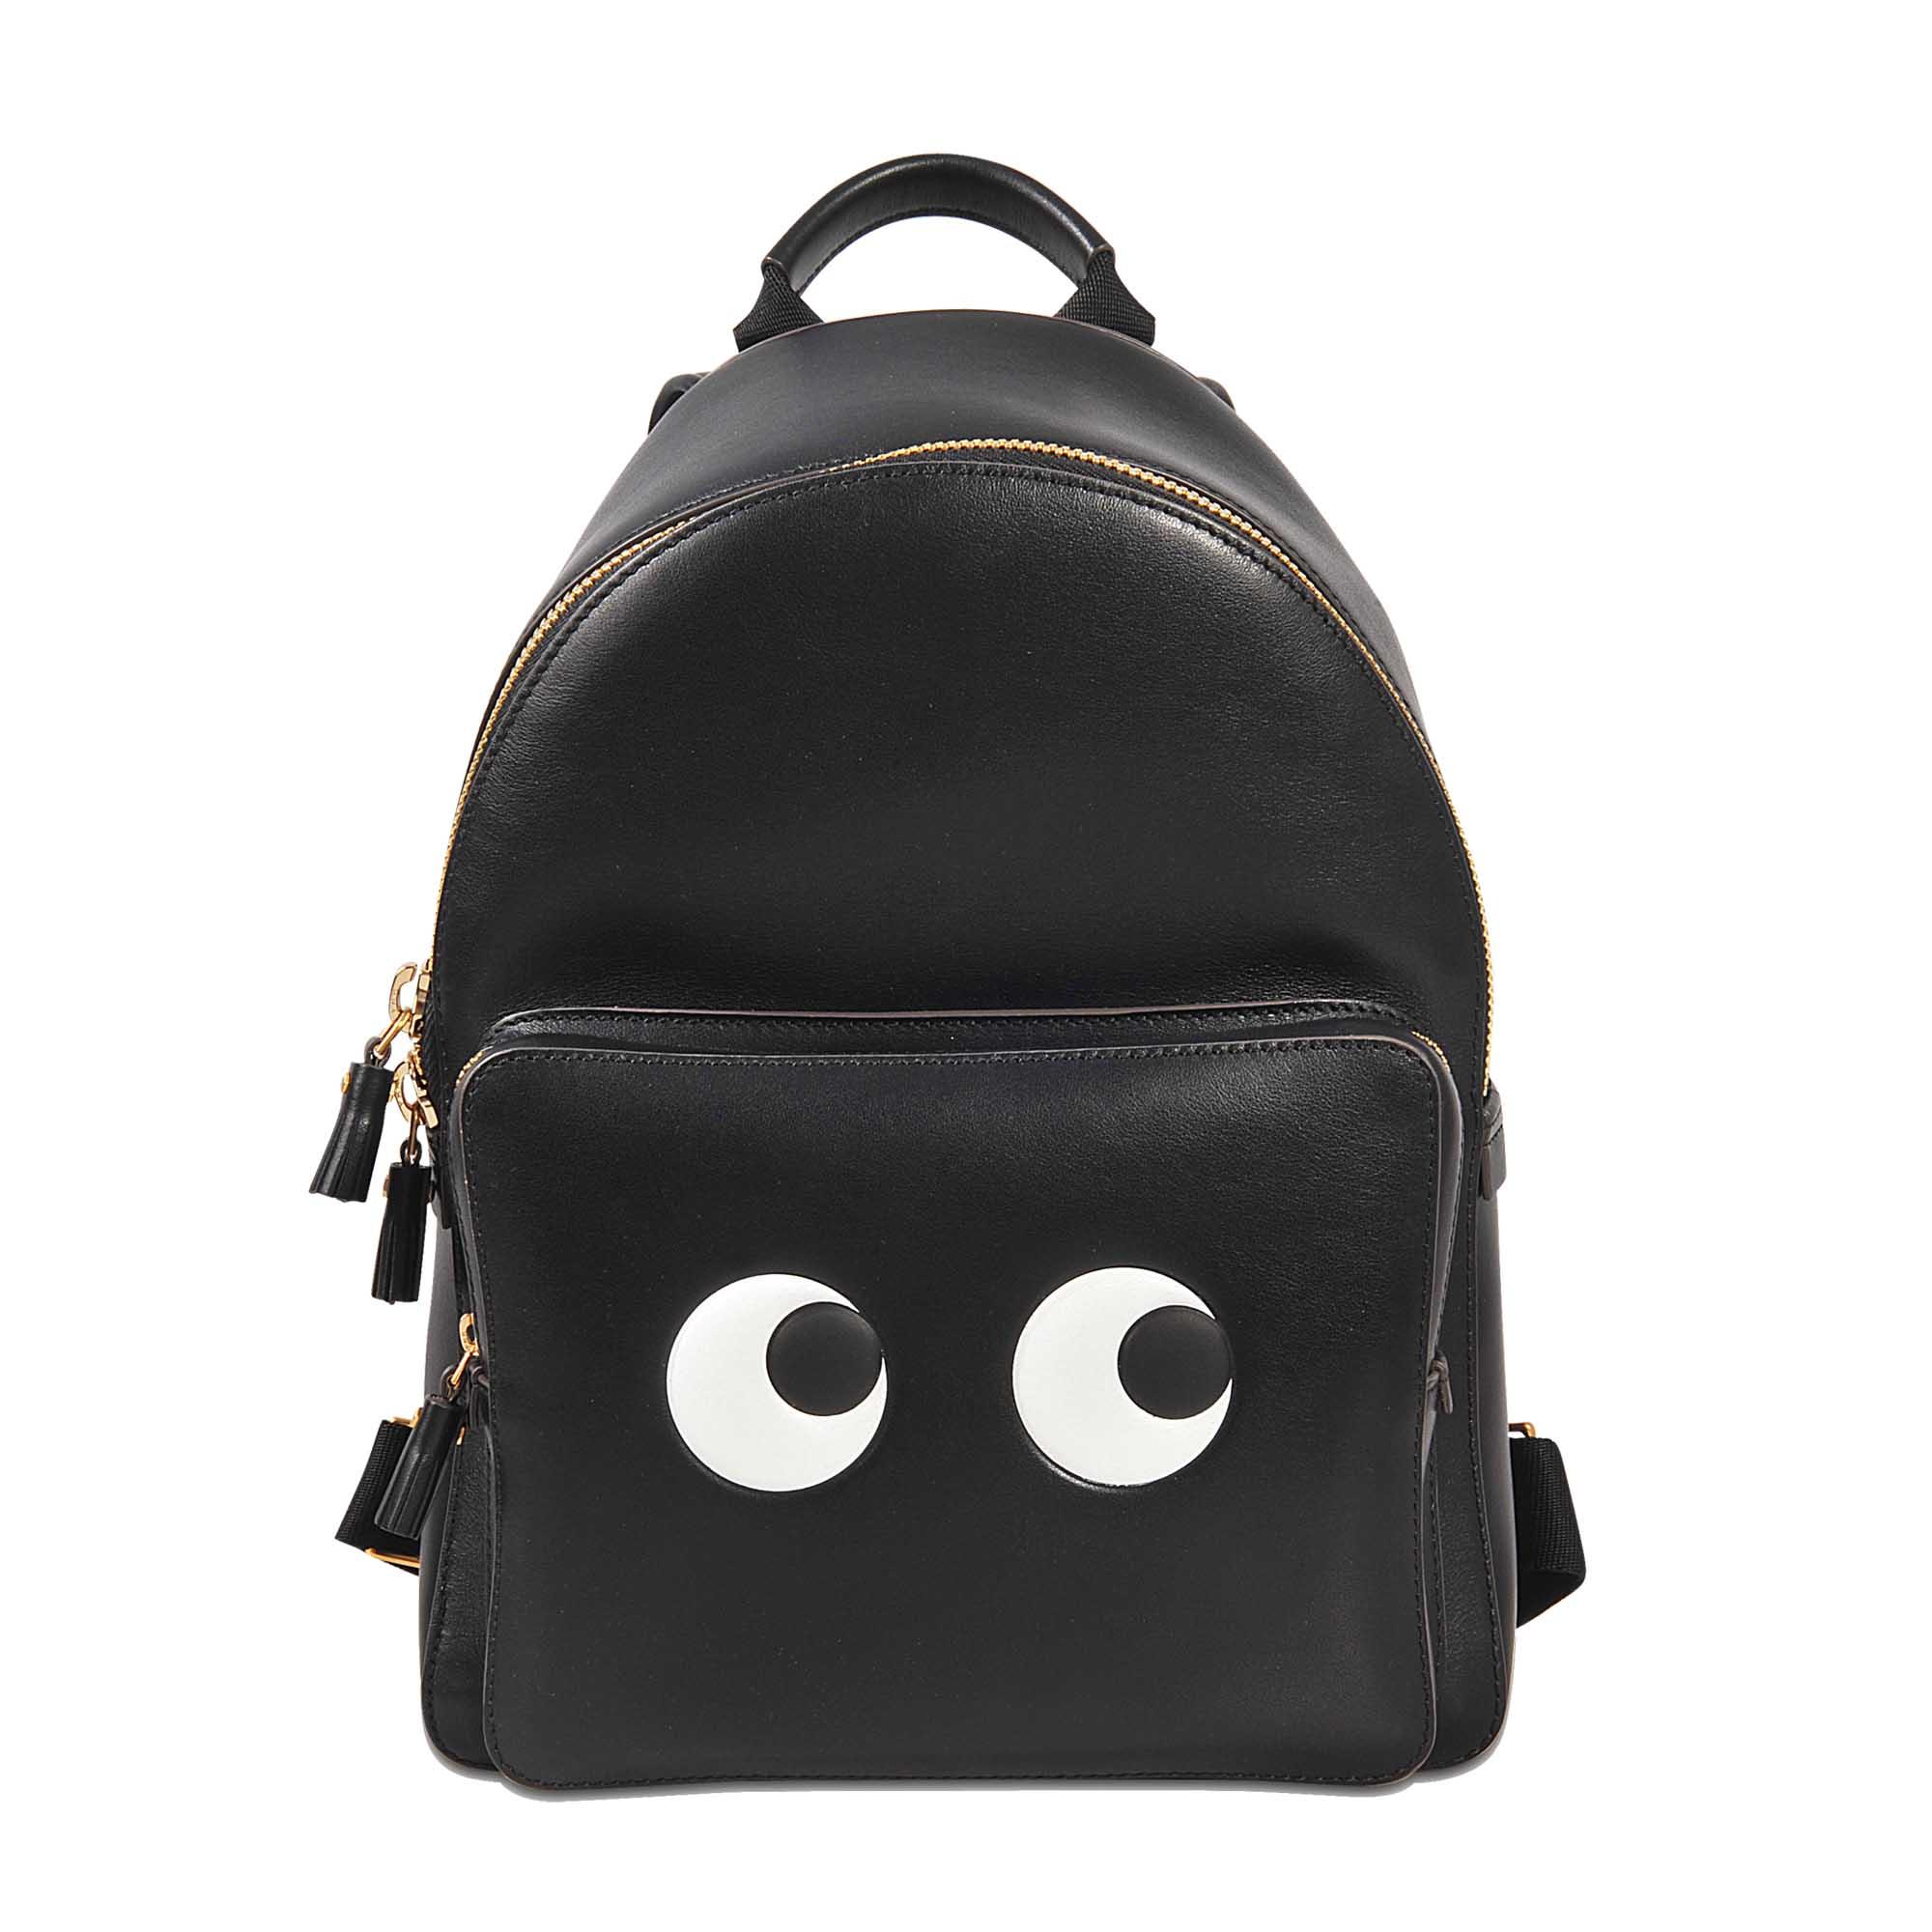 Anya hindmarch Mini Eyes Right Backpack in Black | Lyst